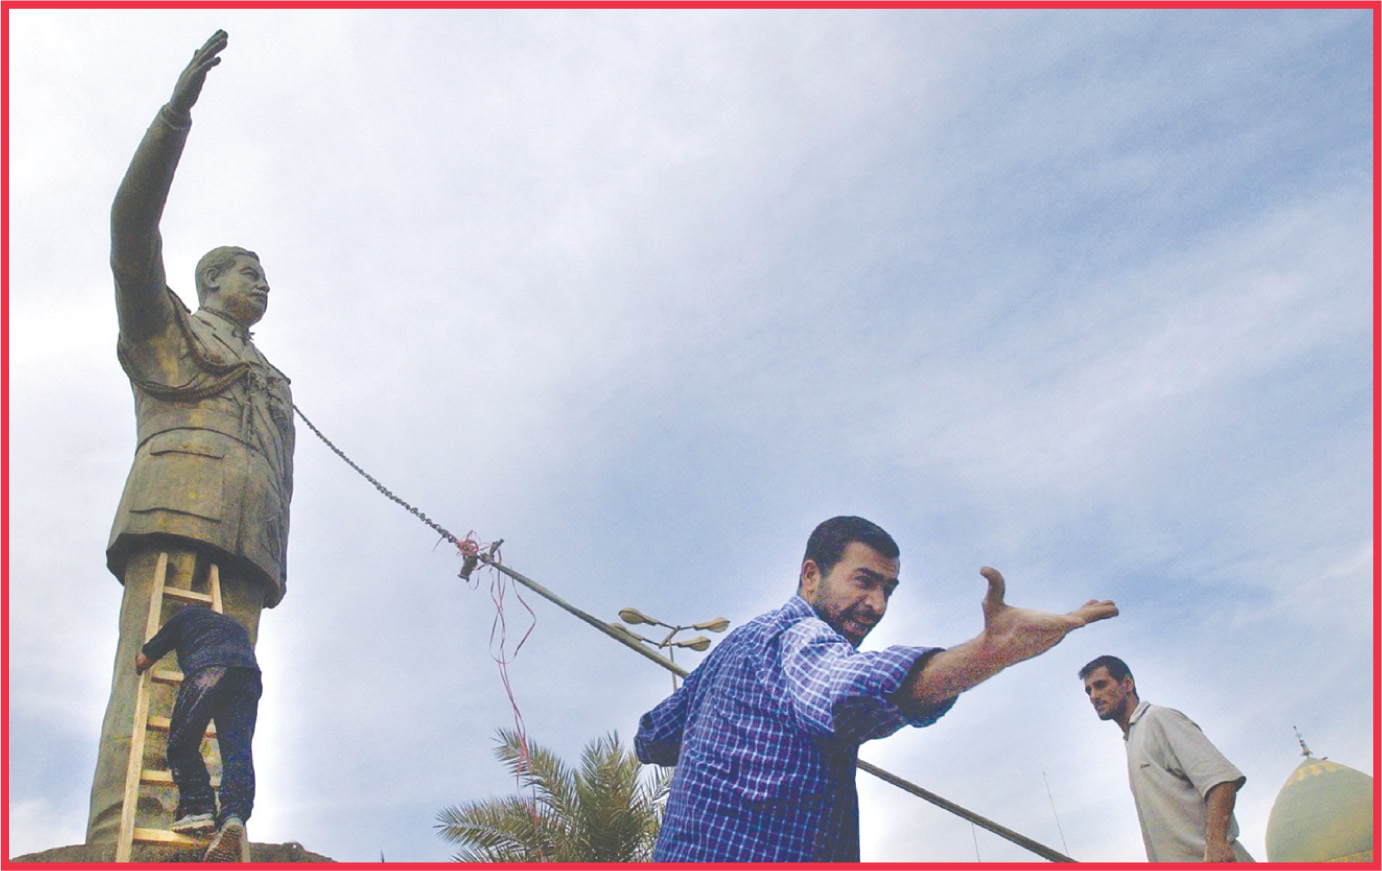 photo: men attach a rope to a statue of Saddam Hussein.